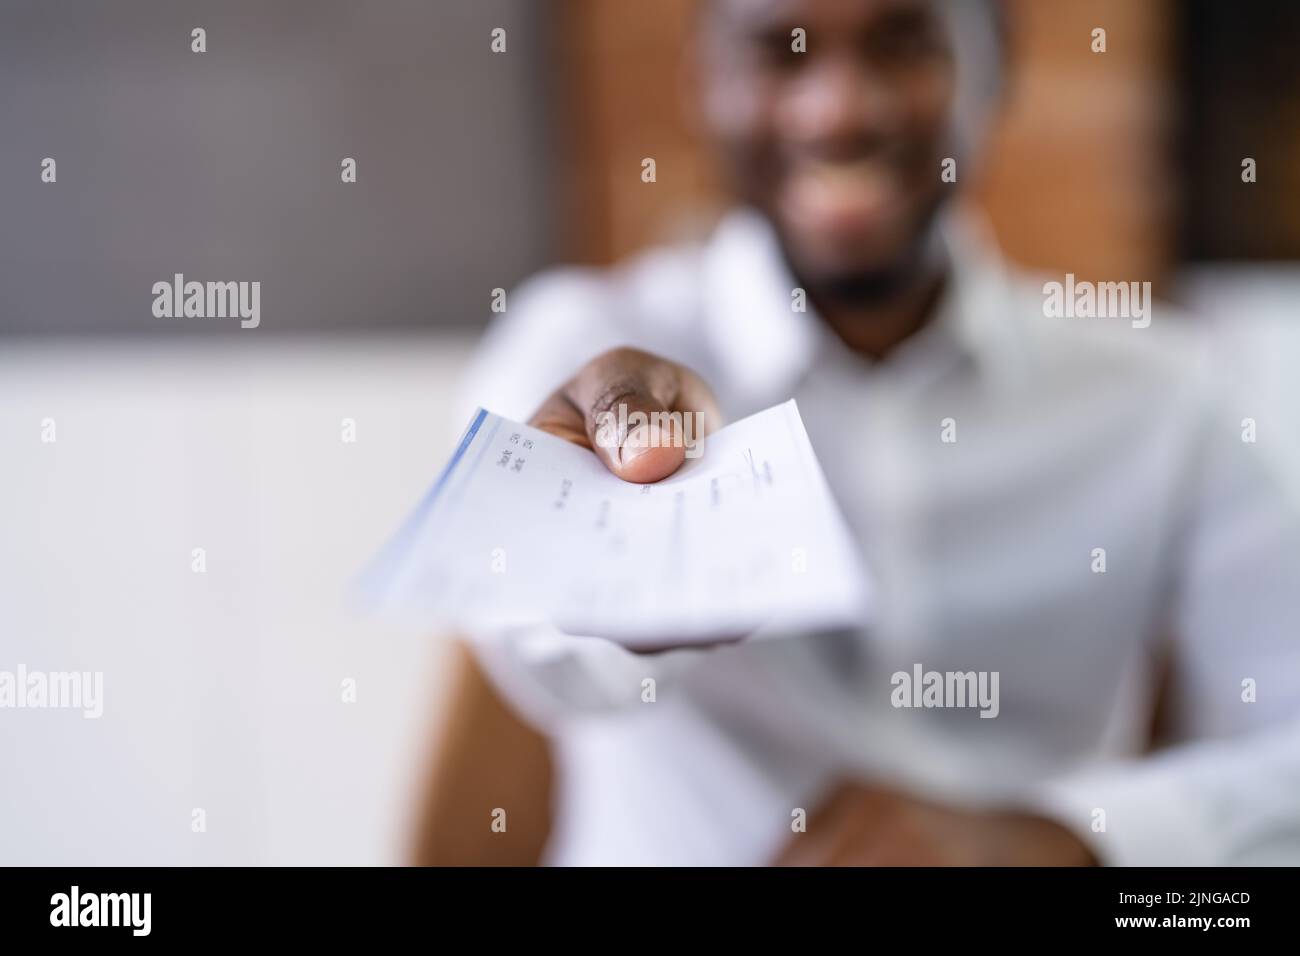 African Business Man Giving Paycheck Or Payroll Cheque Stock Photo